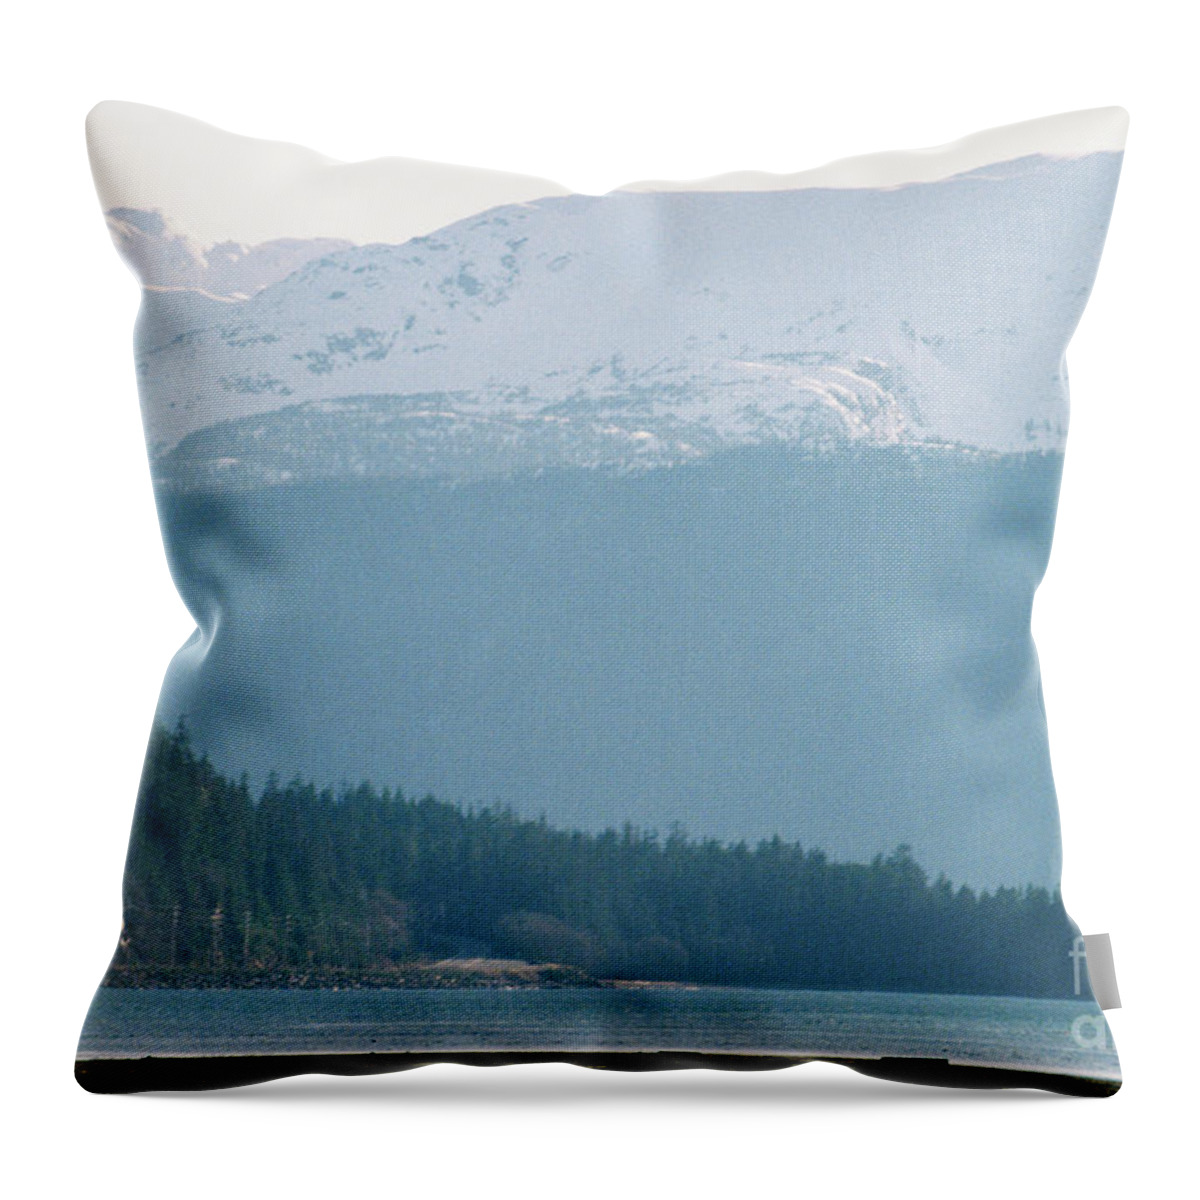 #alaska #juneau #ak #cruise #tours #vacation #peaceful #douglas #outerpoint #capitalcity Throw Pillow featuring the photograph The Drive Around The Bend by Charles Vice